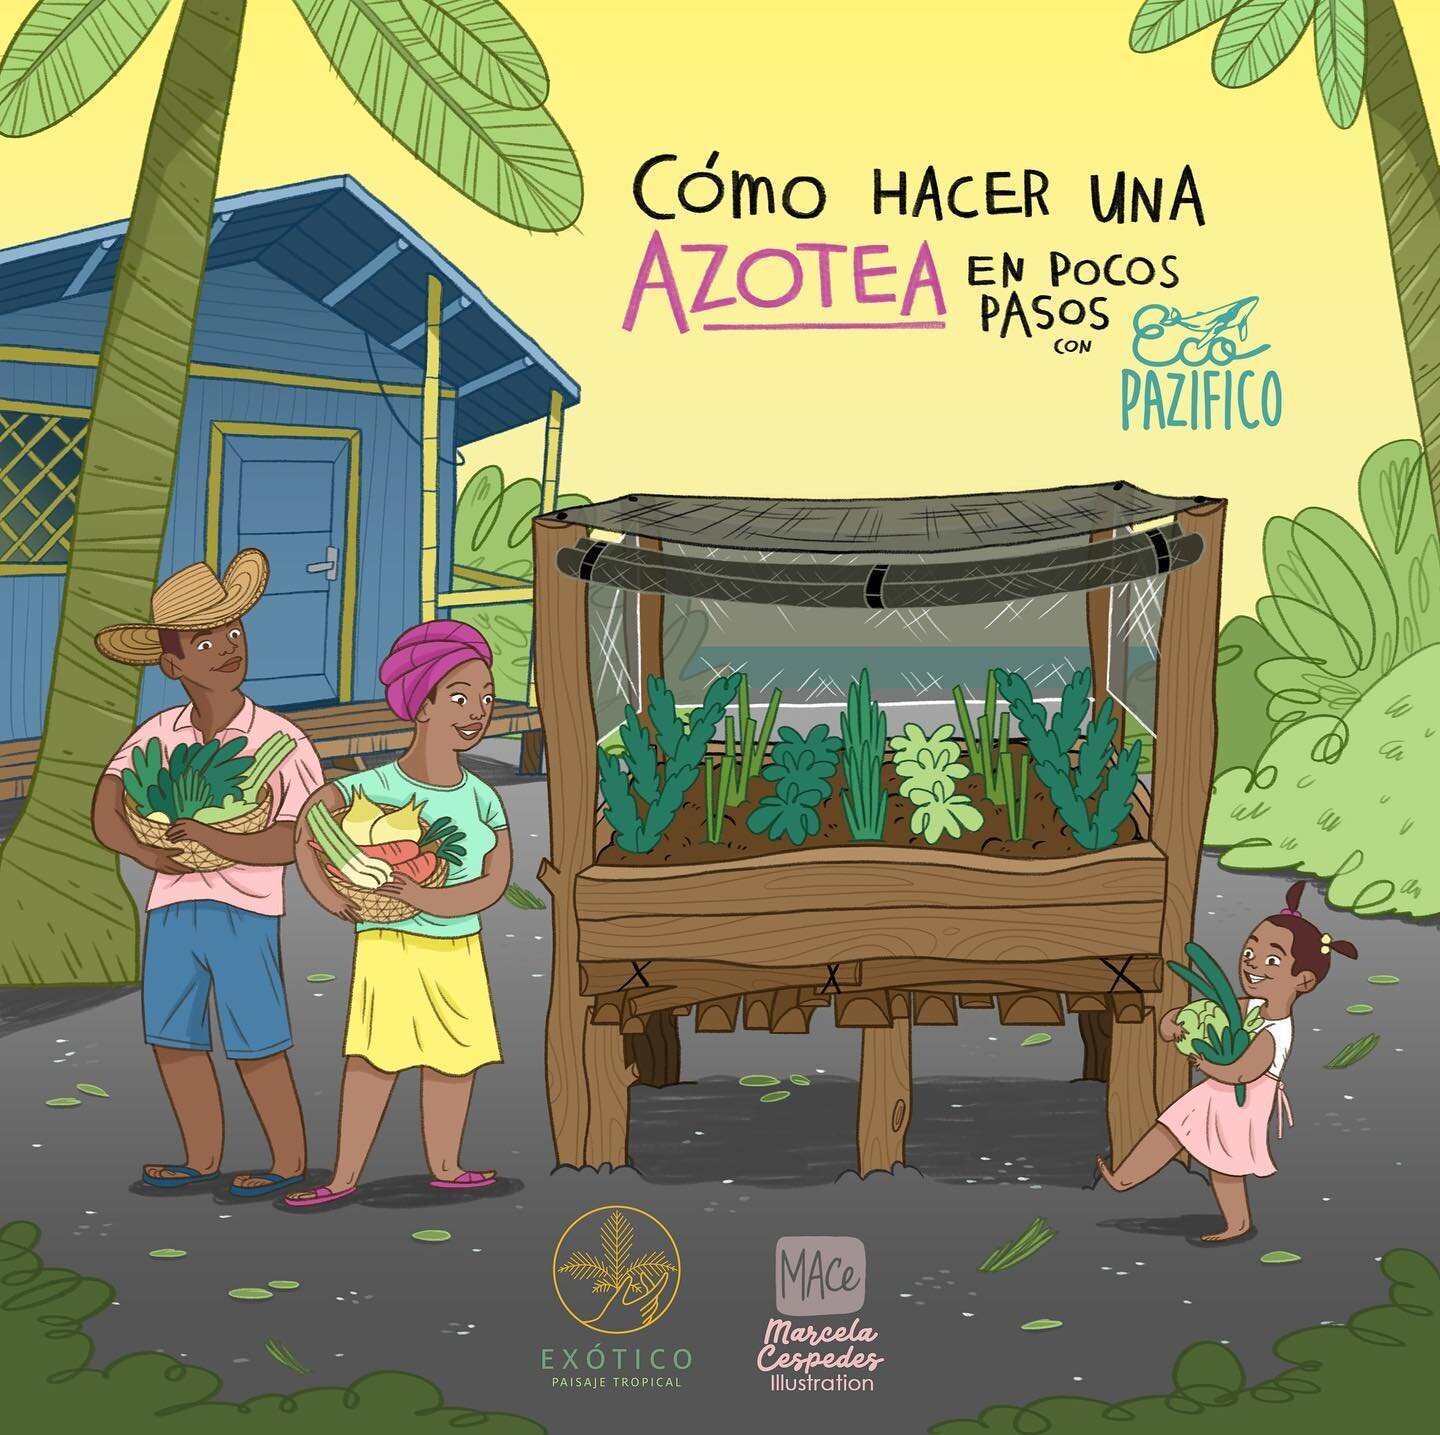 &ldquo;How to make an elevated garden in a few steps...&rdquo;
This is a project from @eco_pazifico to encourage cultivating your own food garden at home in remote places of Colombia where is harder to get all kinds of supplies, but also where the su